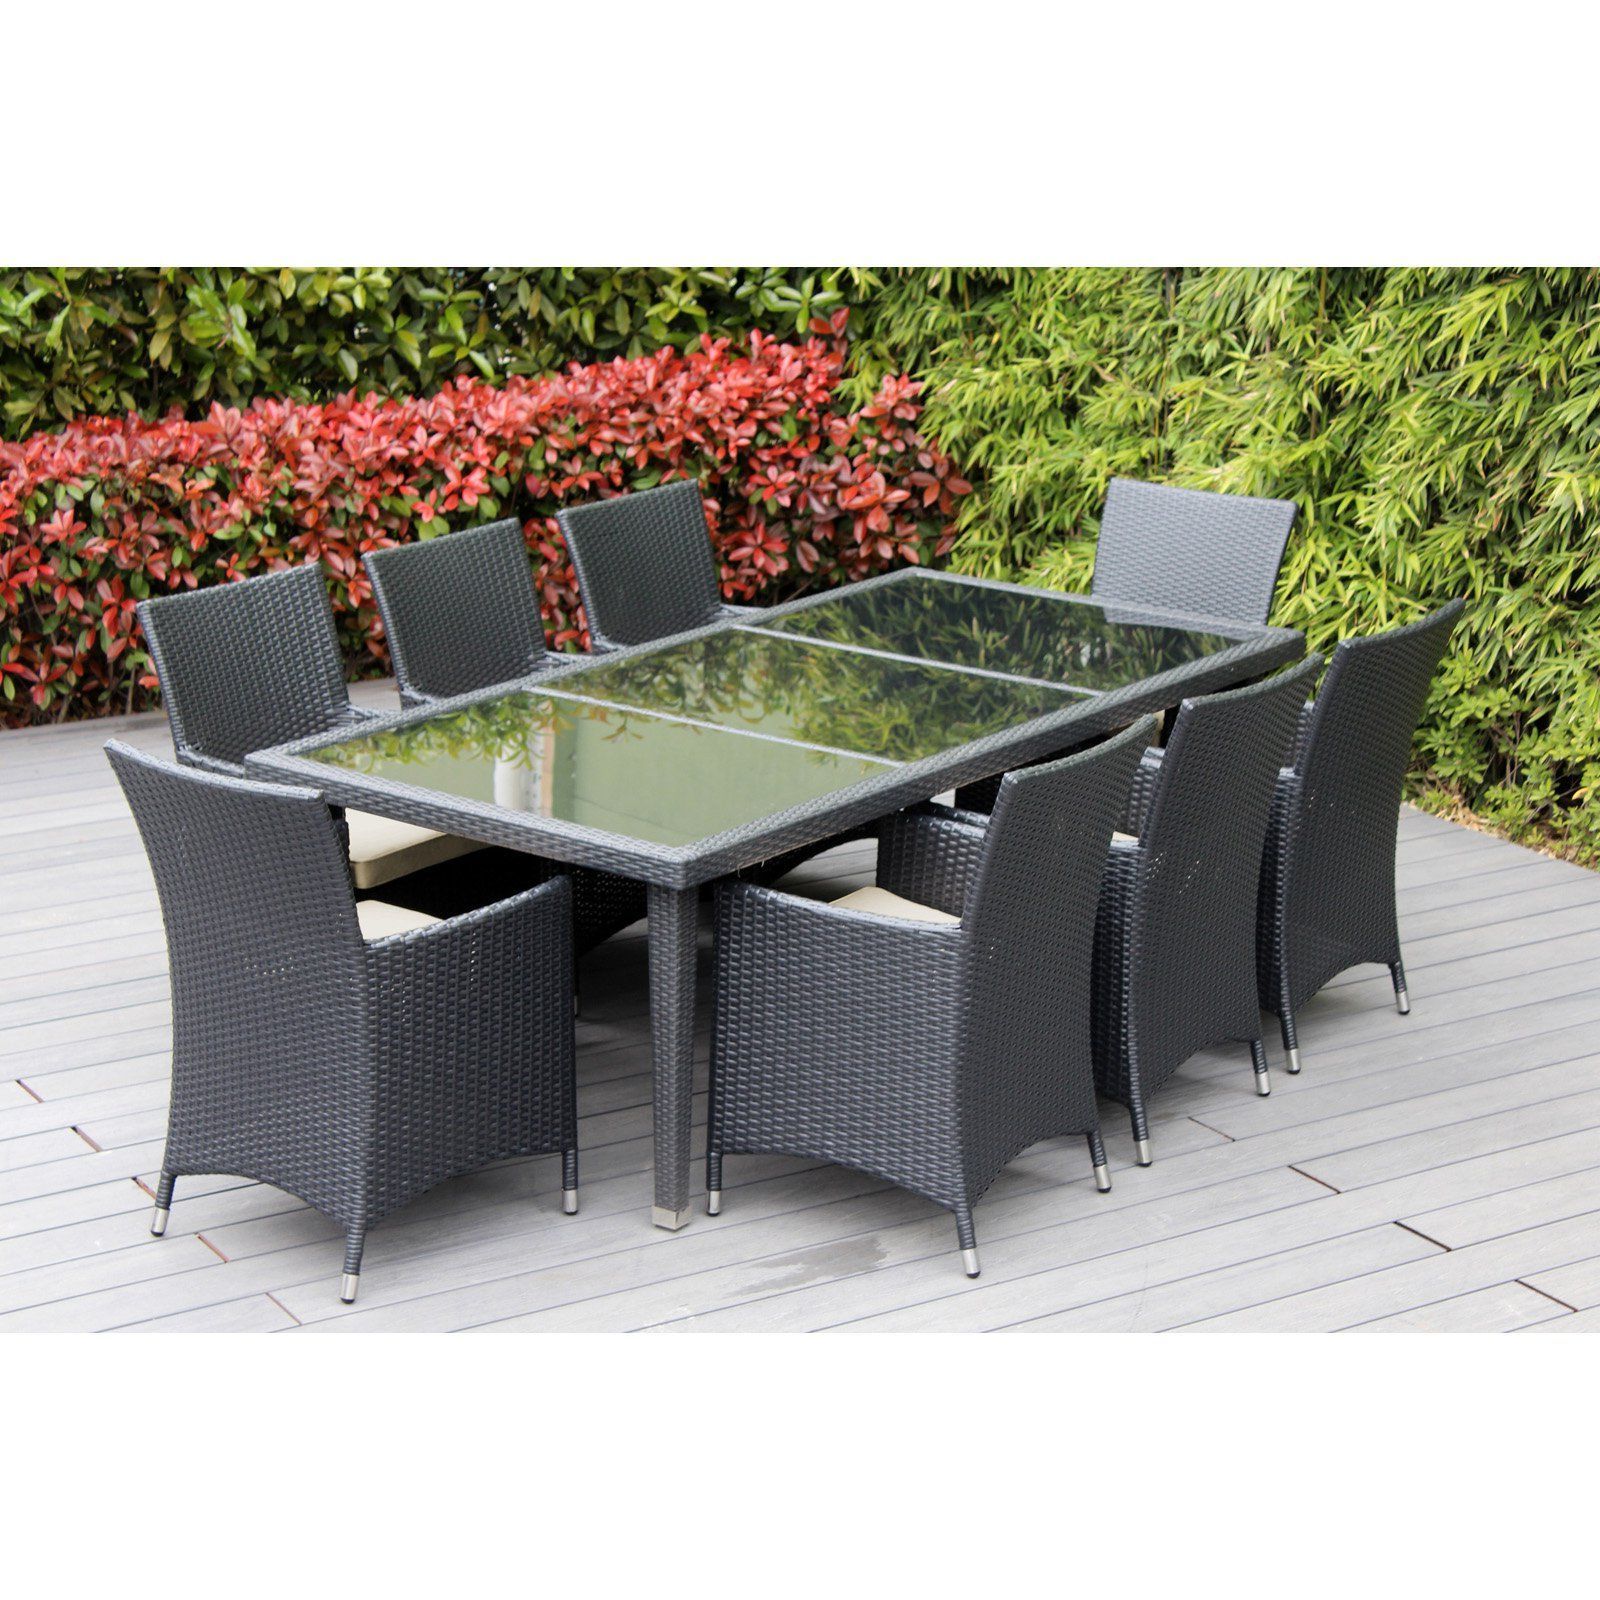 Most Current Gray Wicker Rectangular Patio Dining Sets Throughout Outdoor Ohana All Weather Wicker 9 Piece Patio Dining Table Set Gray (View 14 of 15)